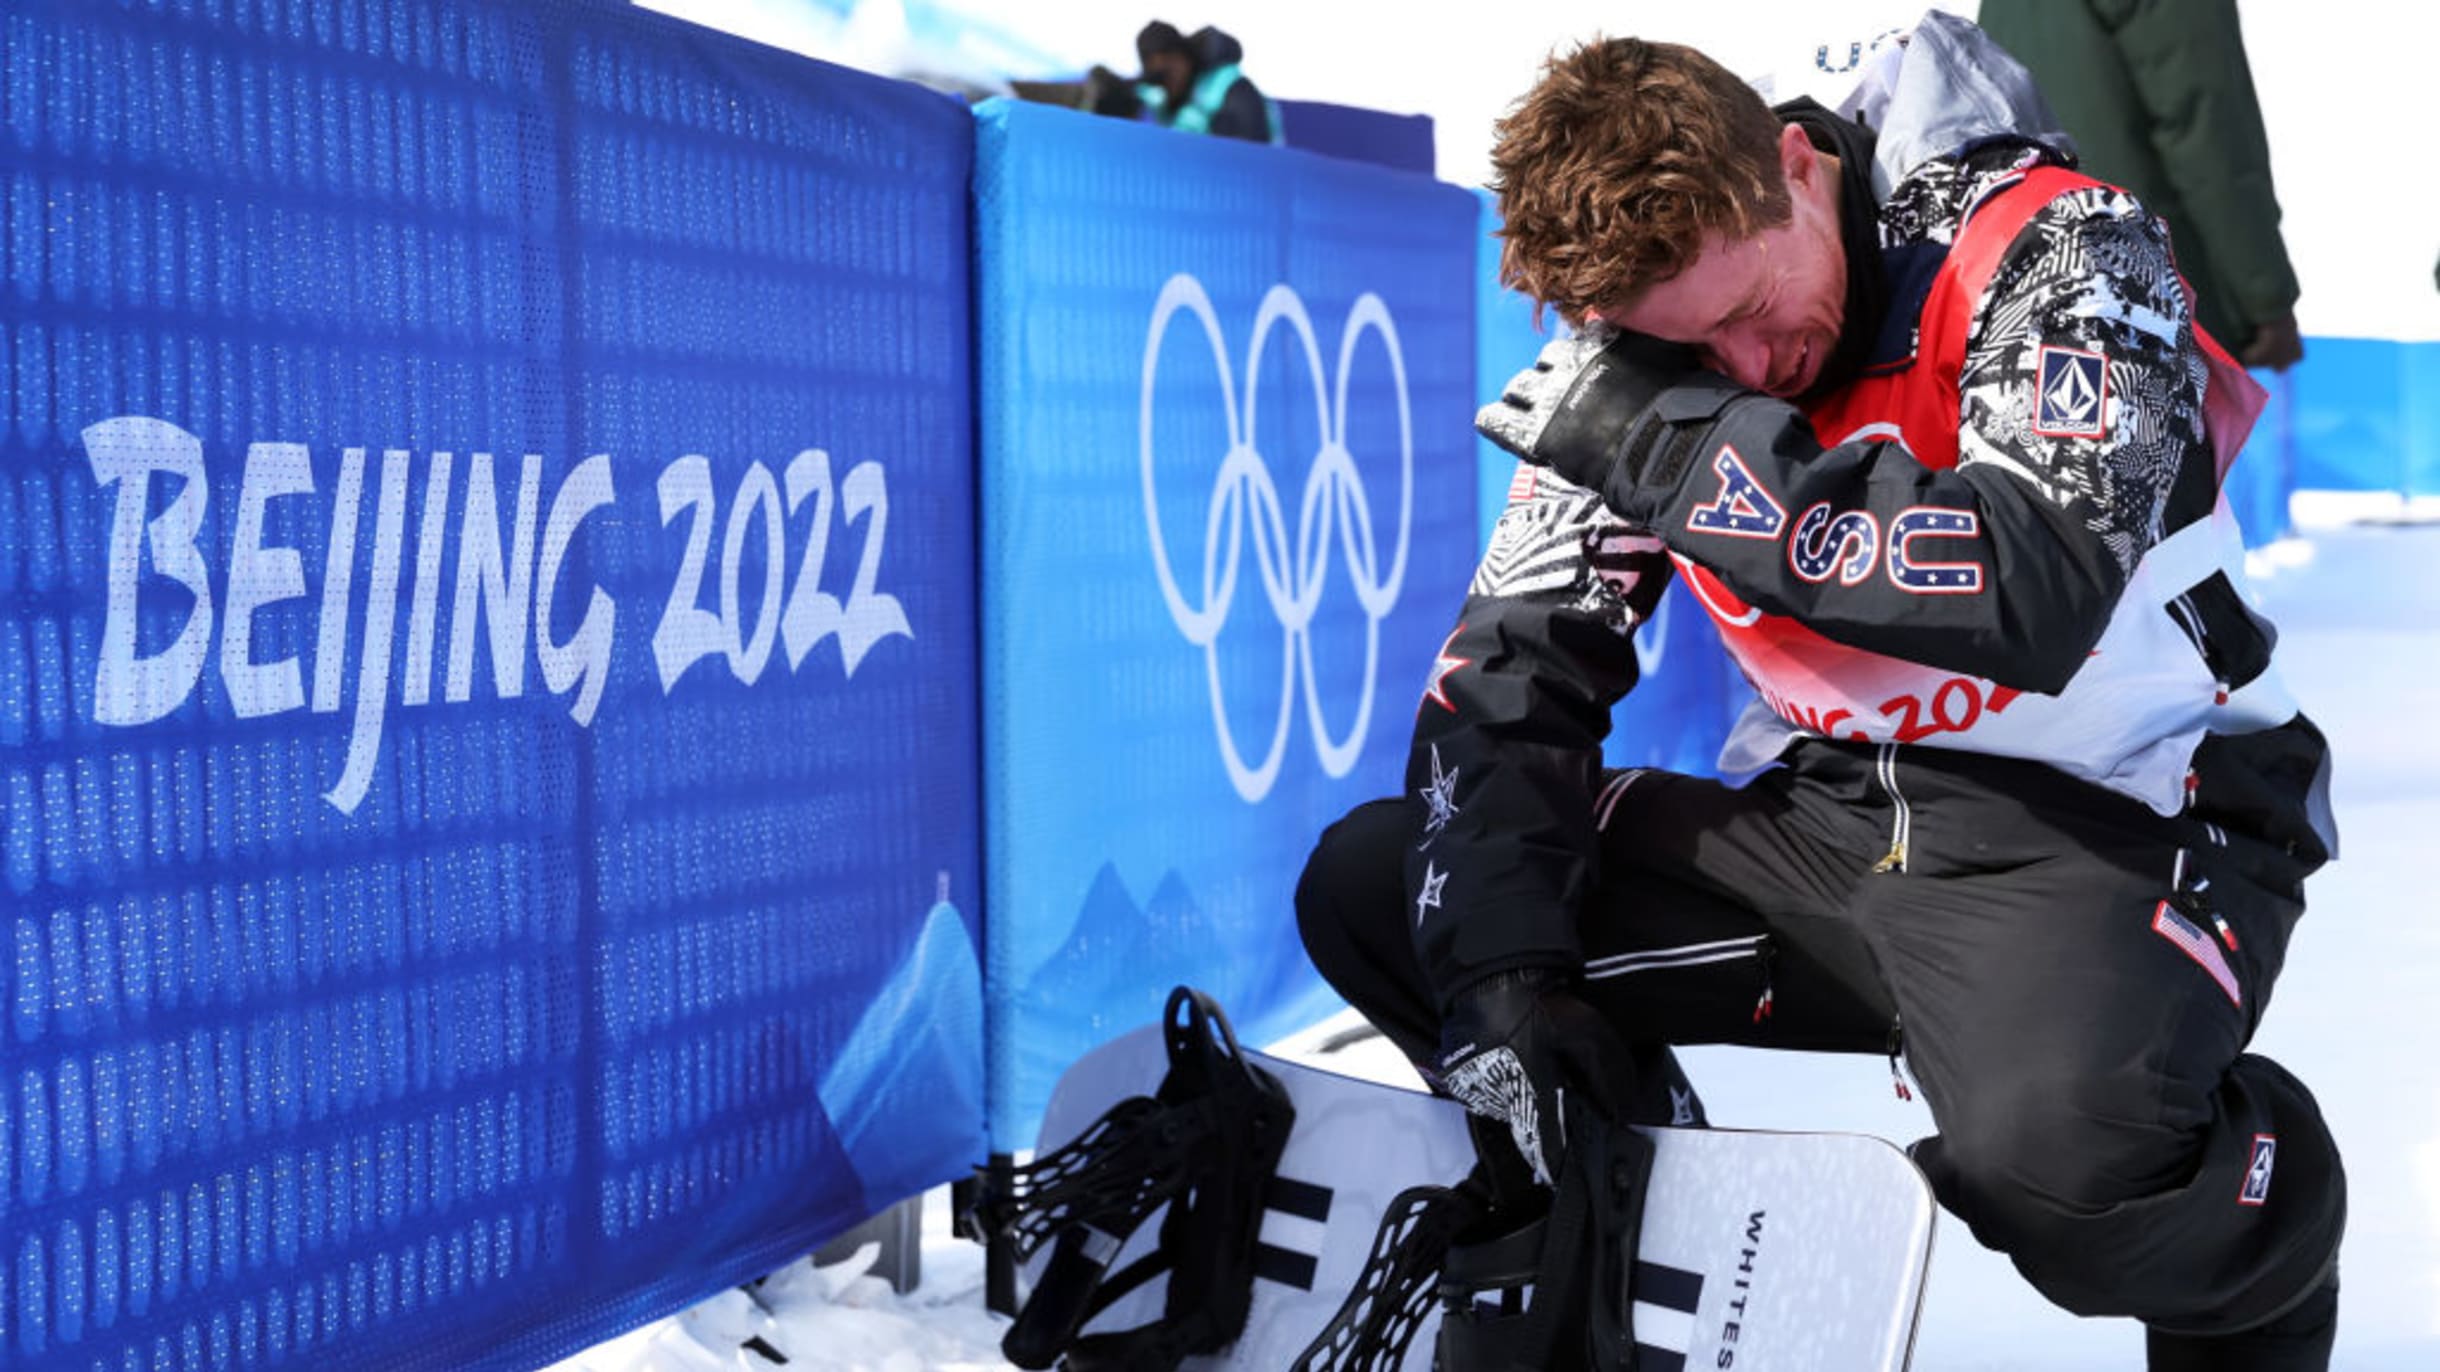 Shaun White Fans Are Certain He's Going to Propose to Nina Dobrev